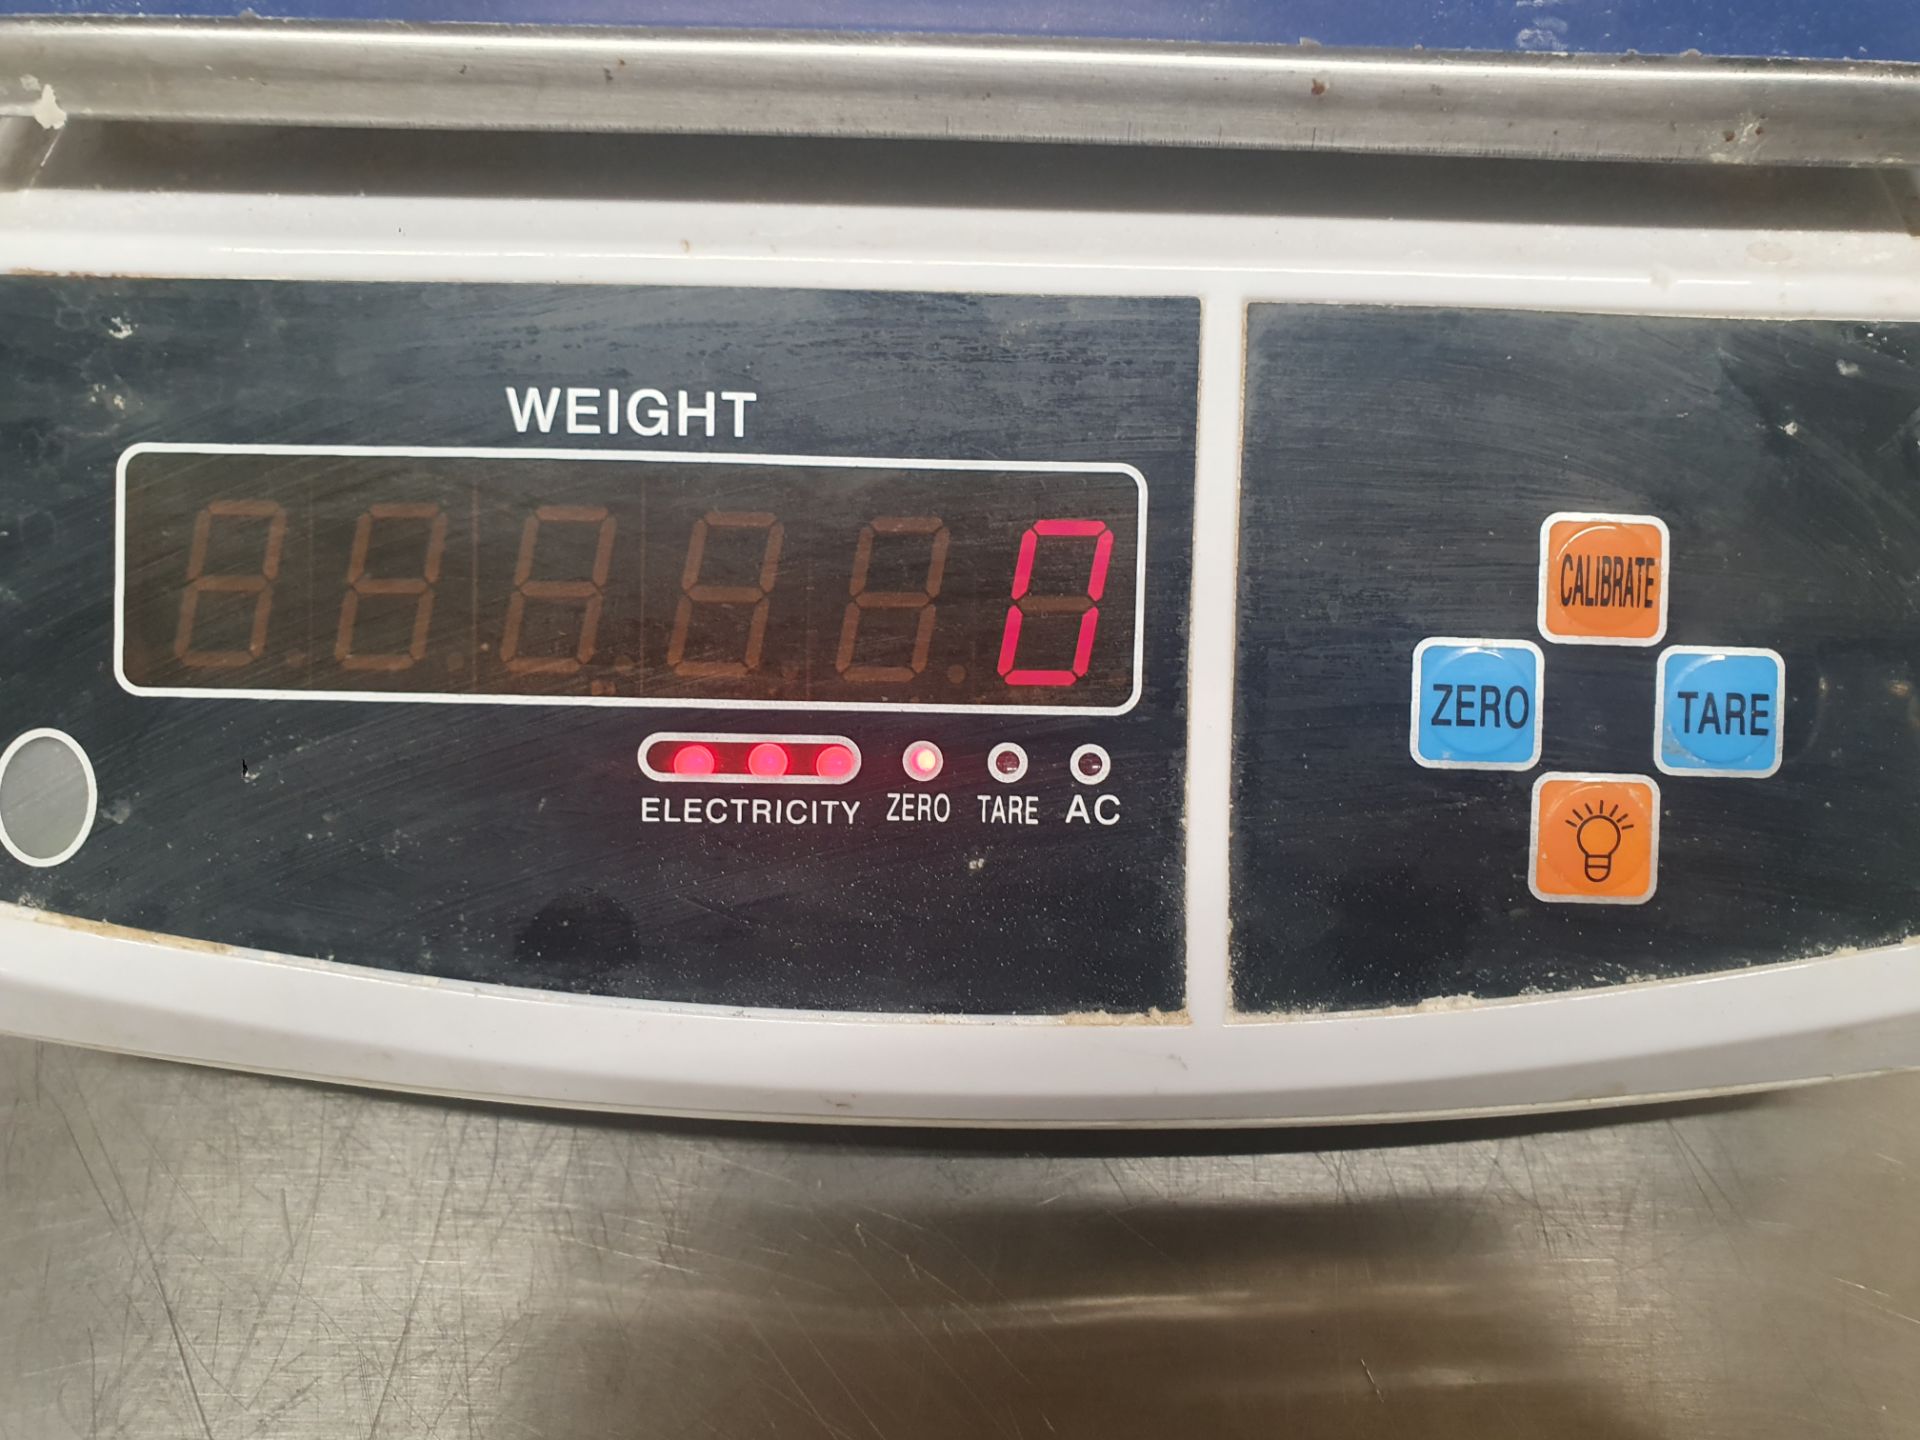 Digital Kitchen Scales. 30kgs Max. Capacity. New. Boxed - Image 9 of 9